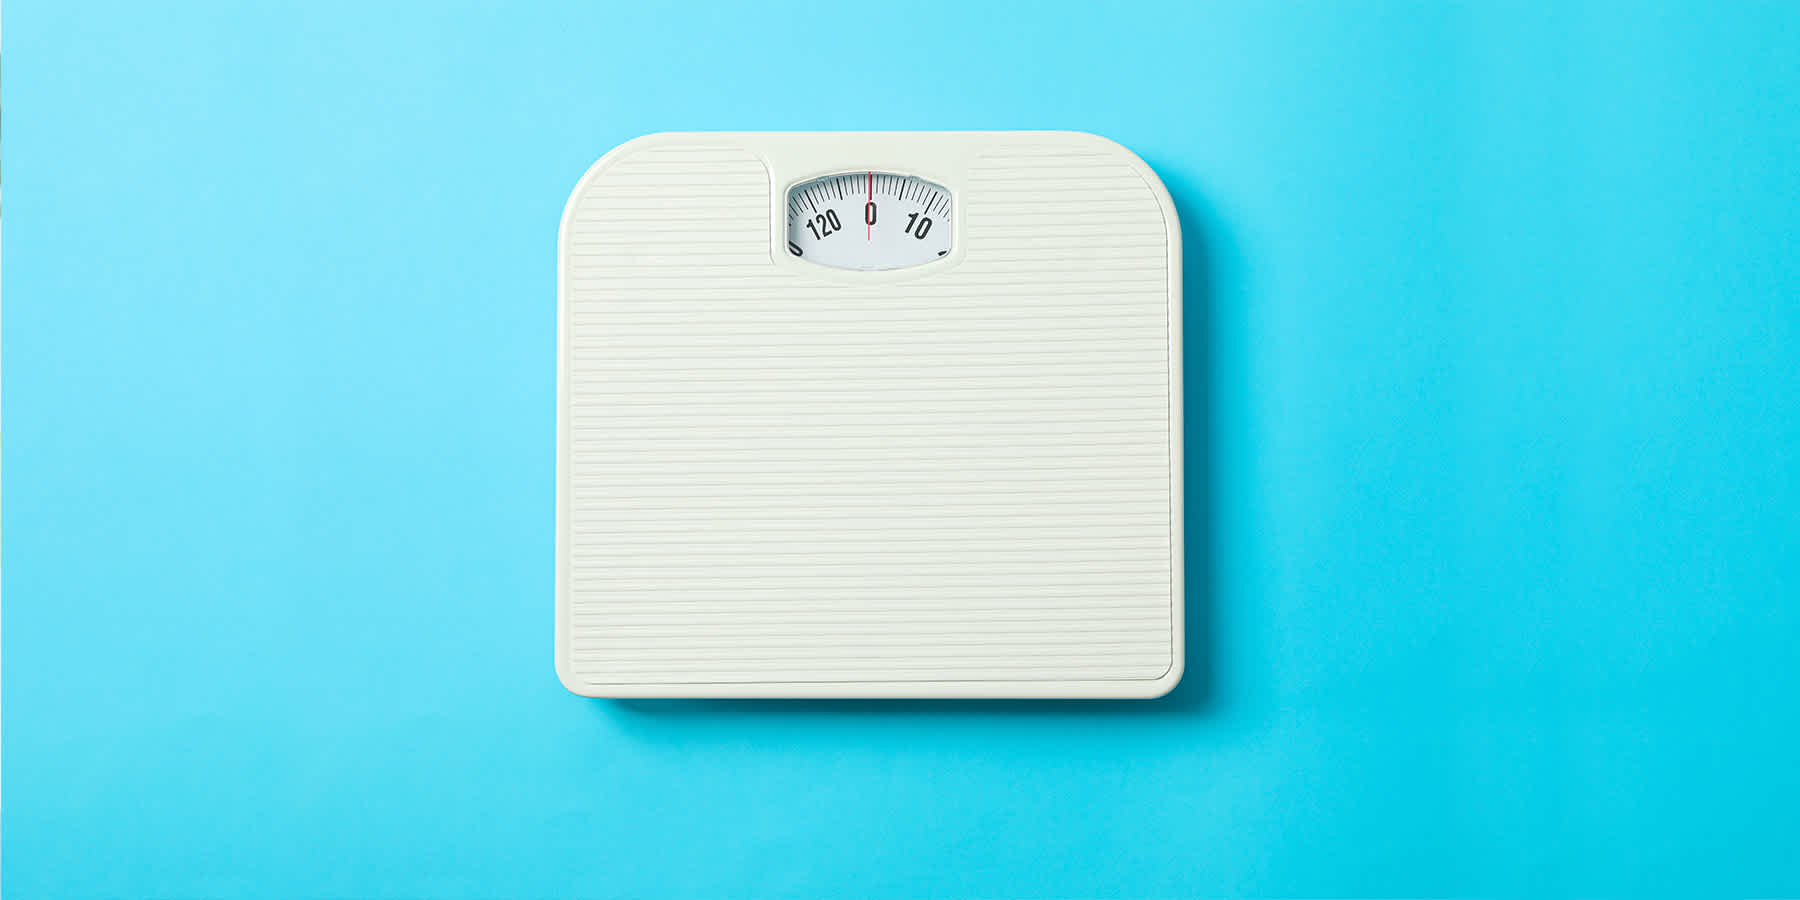 Bathroom scale against blue background that can be used to check weight gain with PCOS